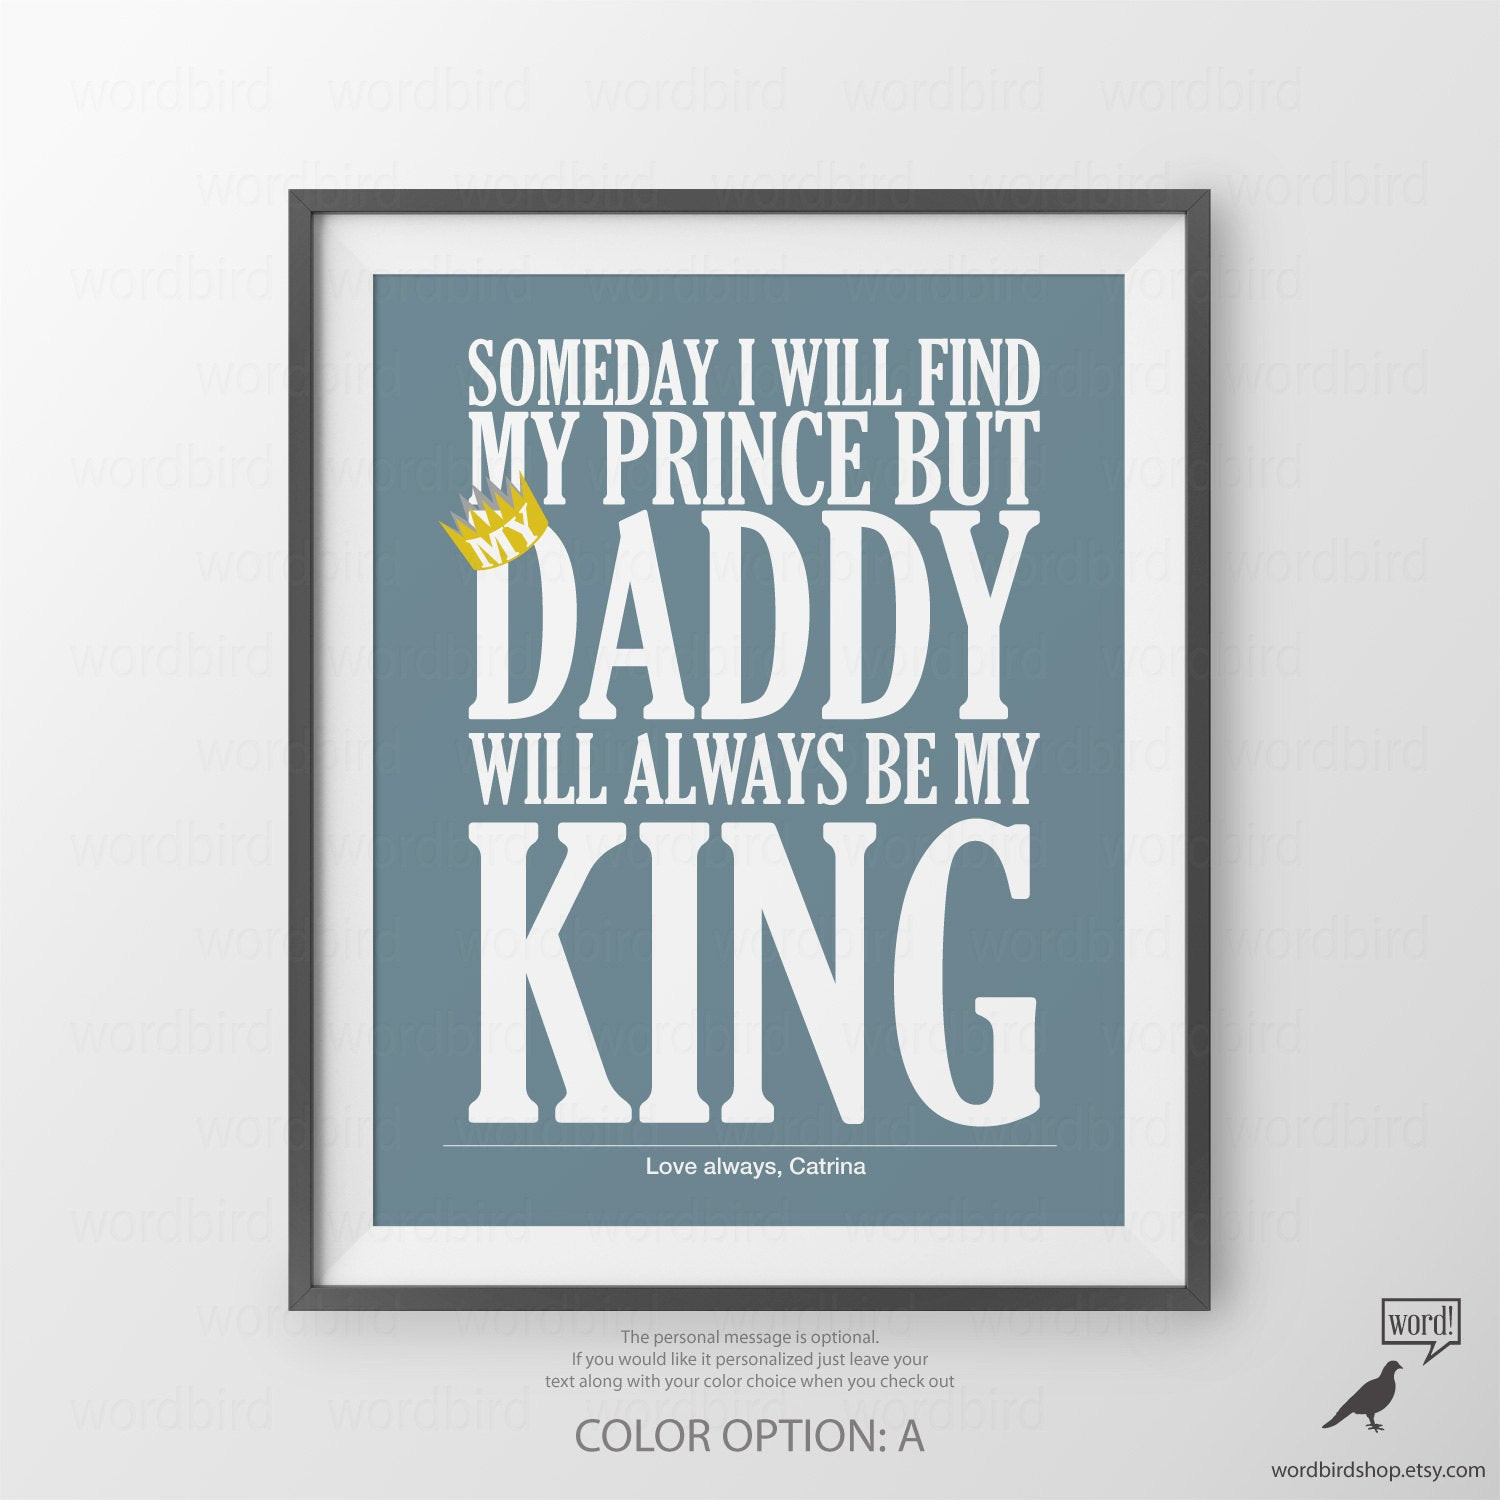 Christmas Gift Ideas For Dad From Daughter
 Personalized Christmas Gift for Dad Birthday Gift by